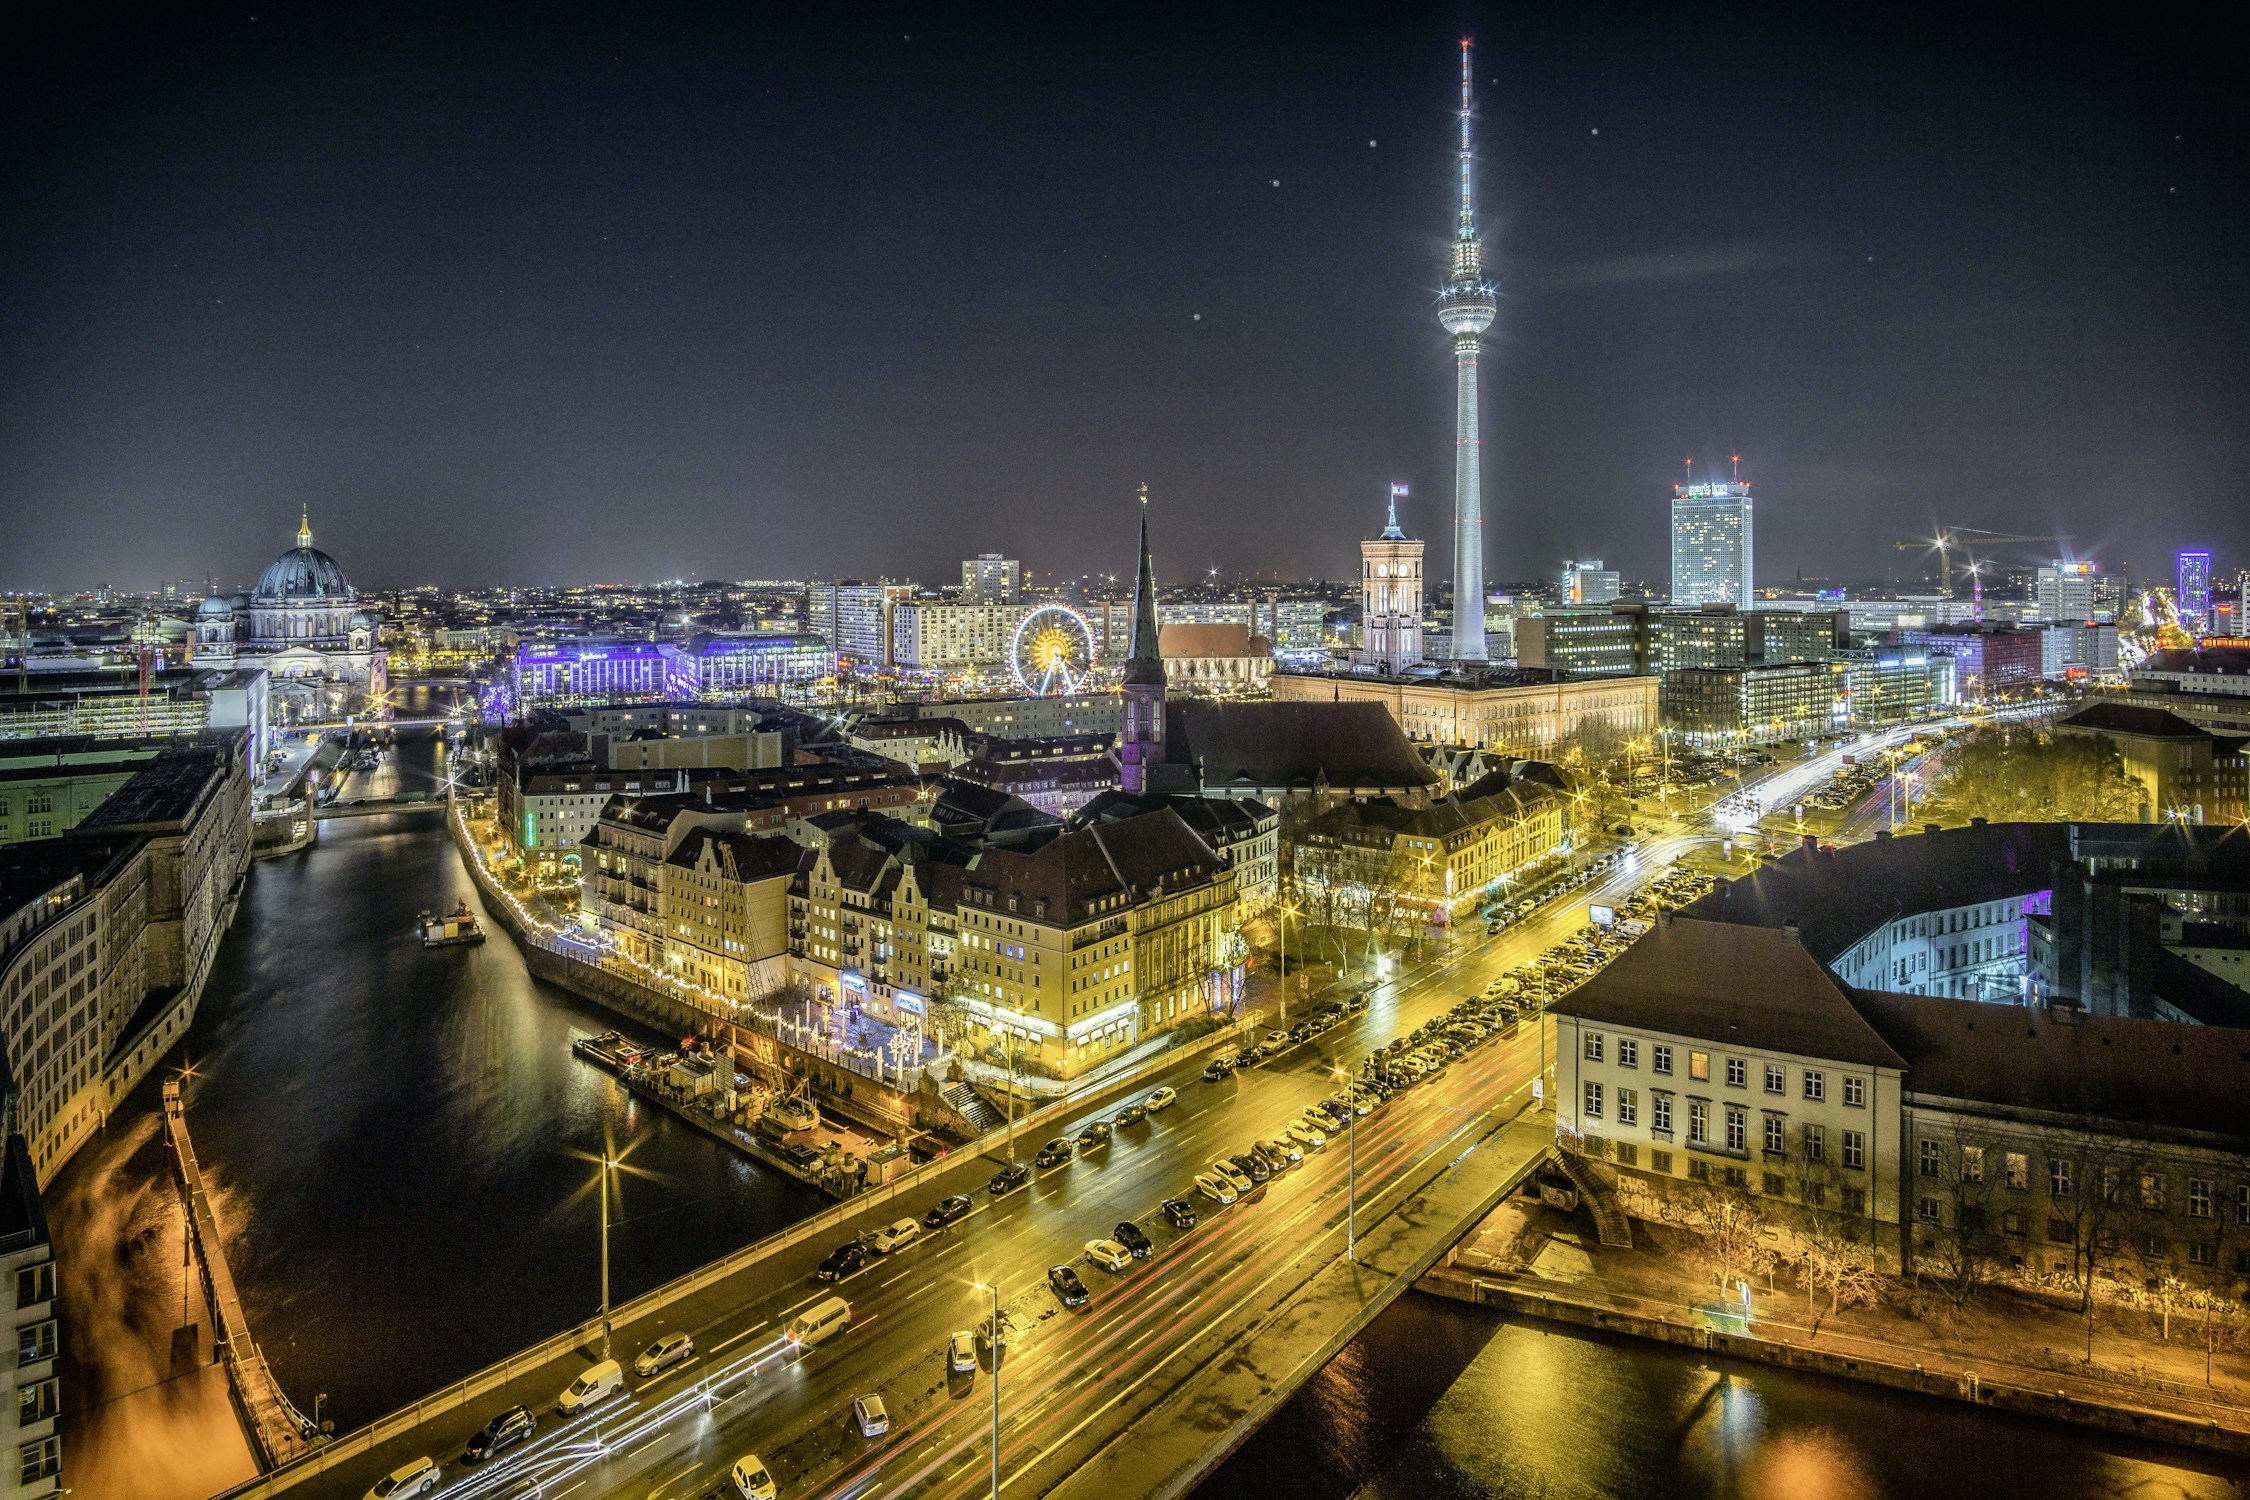 city of Berlin in Germany at night